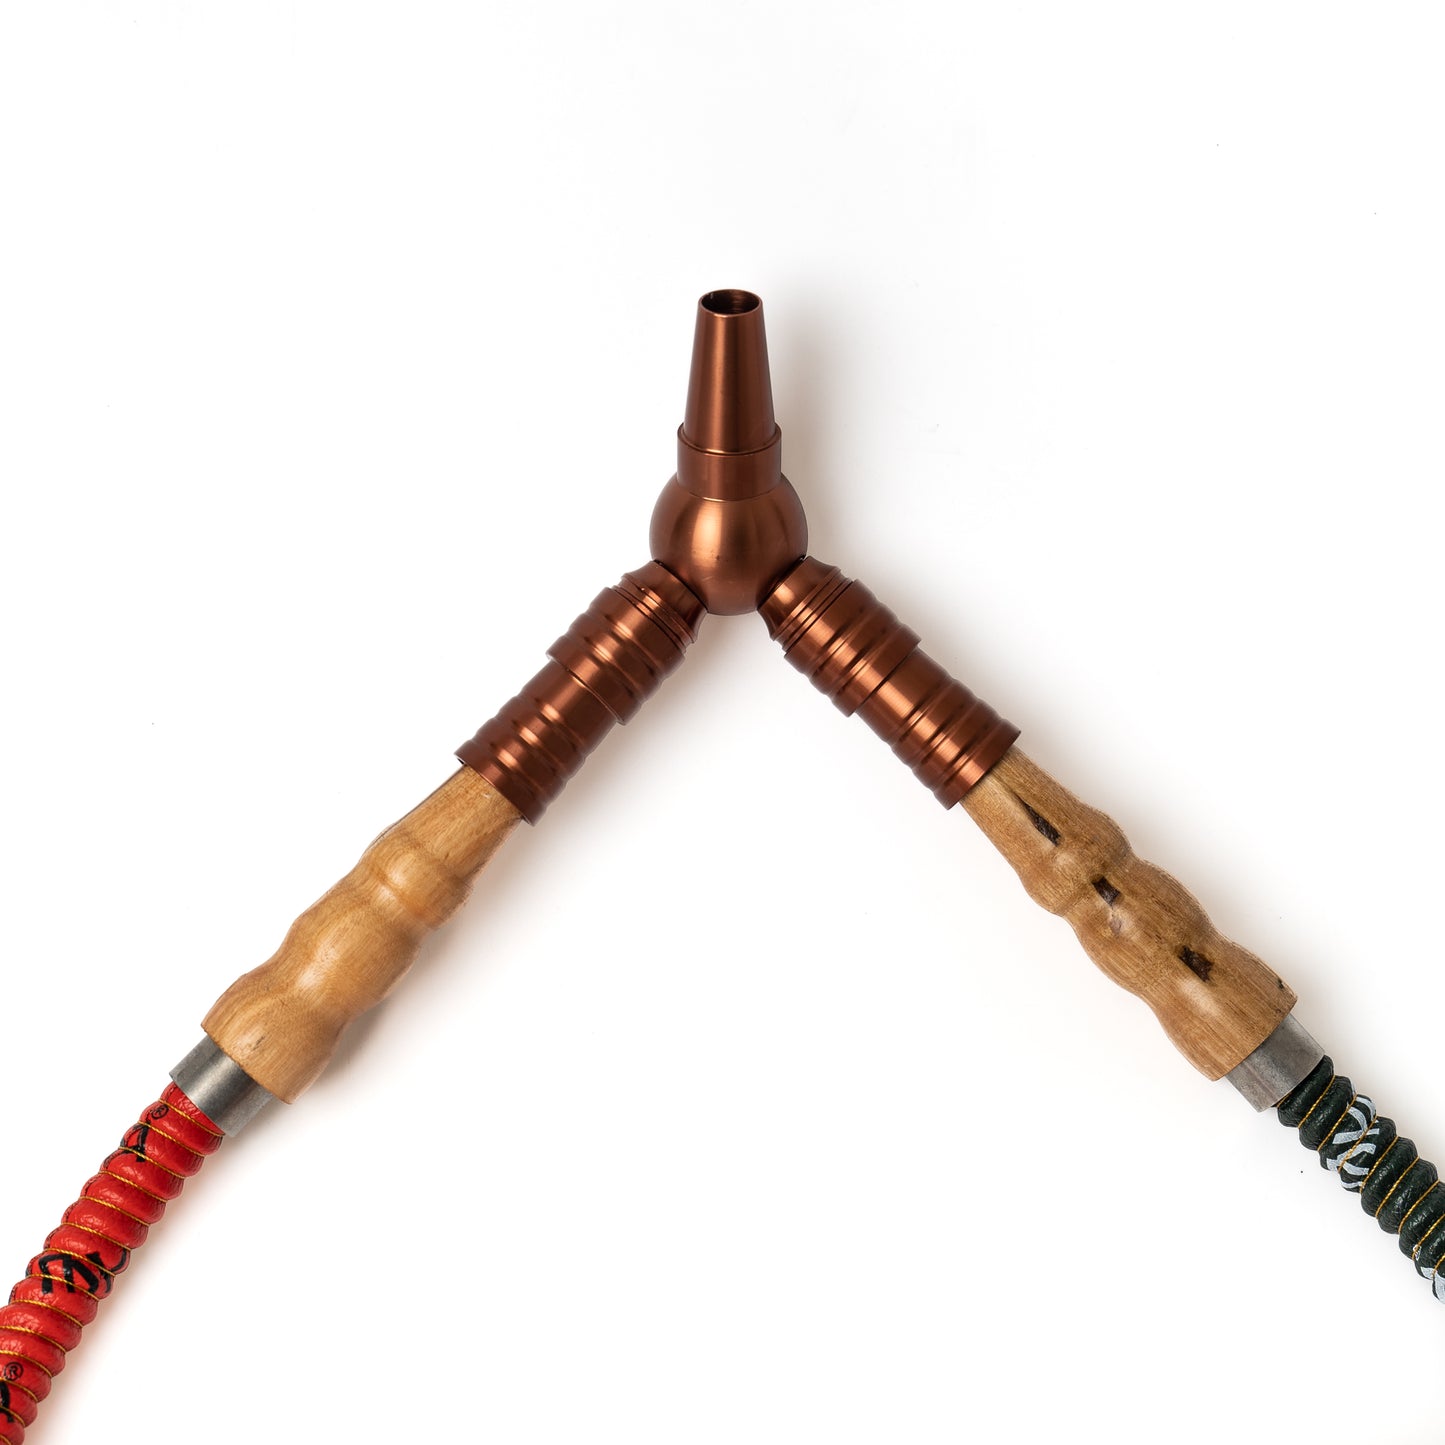 Dual Pipe Extension (Connector) for Hookah Pipe - Golden